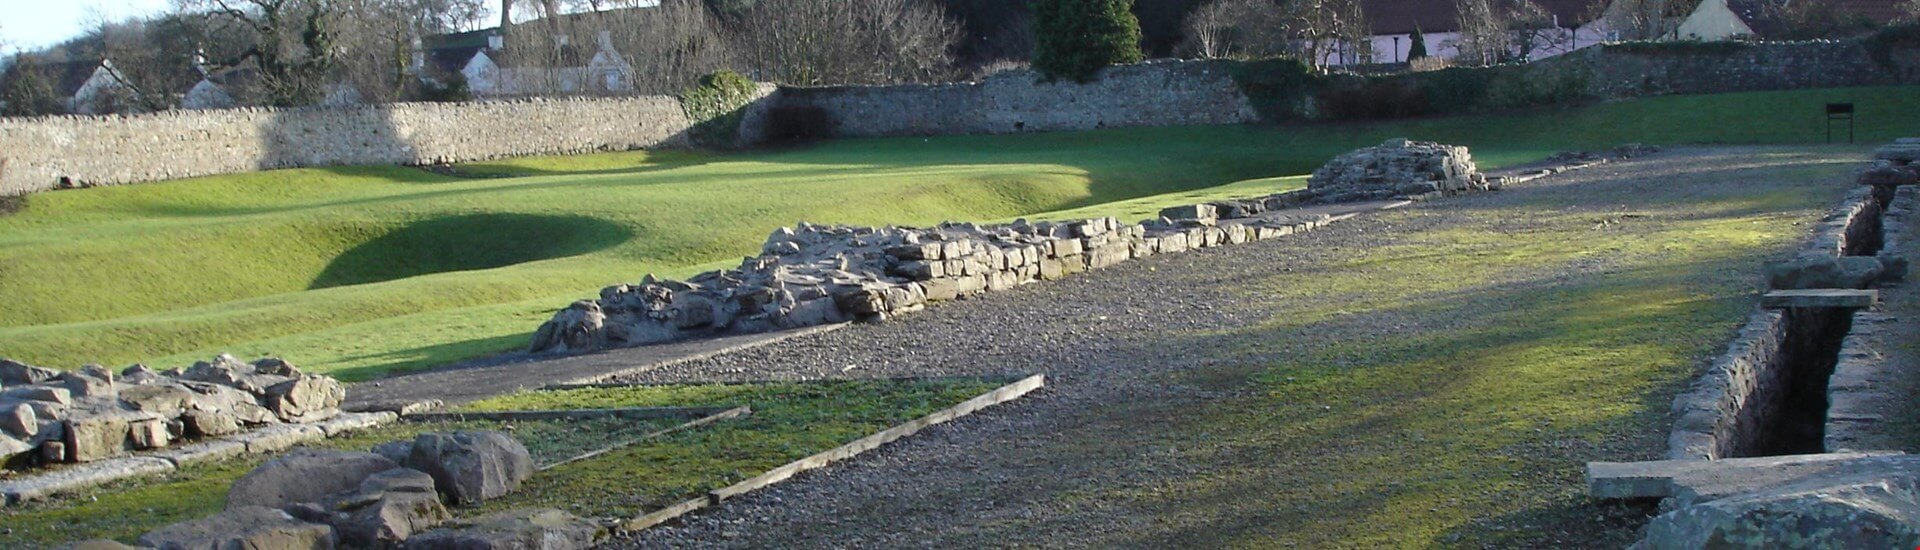 Roman fort remains